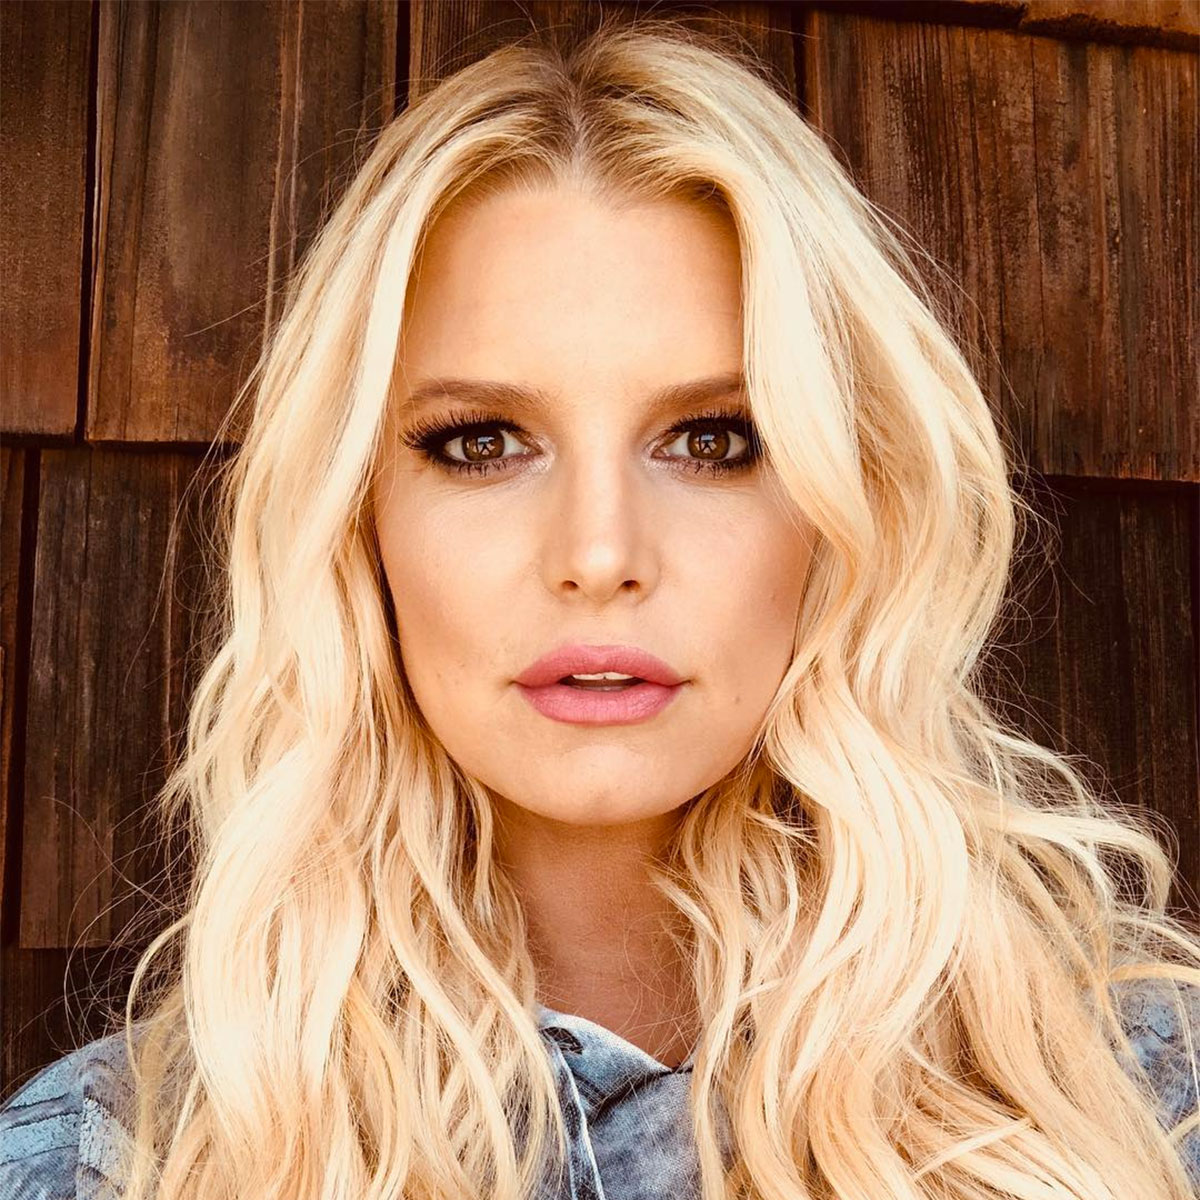 Fans Question Jessica Simpson About Birdie After New Pic